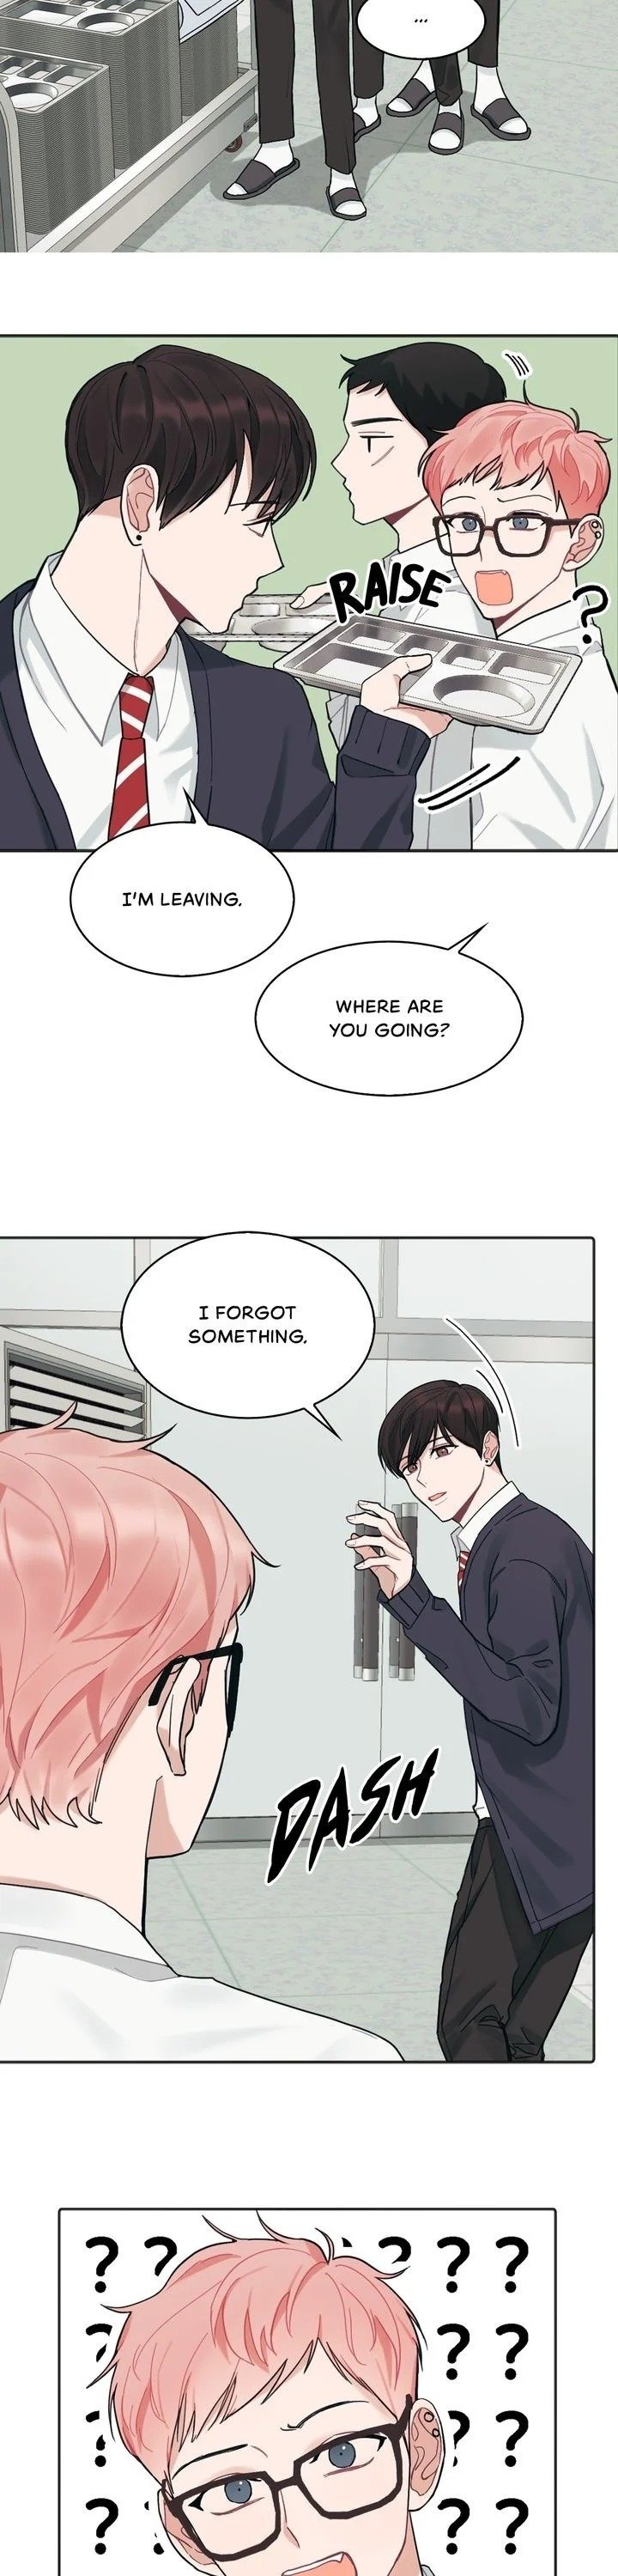 When You're Targeted by the Bully - Chapter 15 - MANGAGG Translation  manhua, manhwa